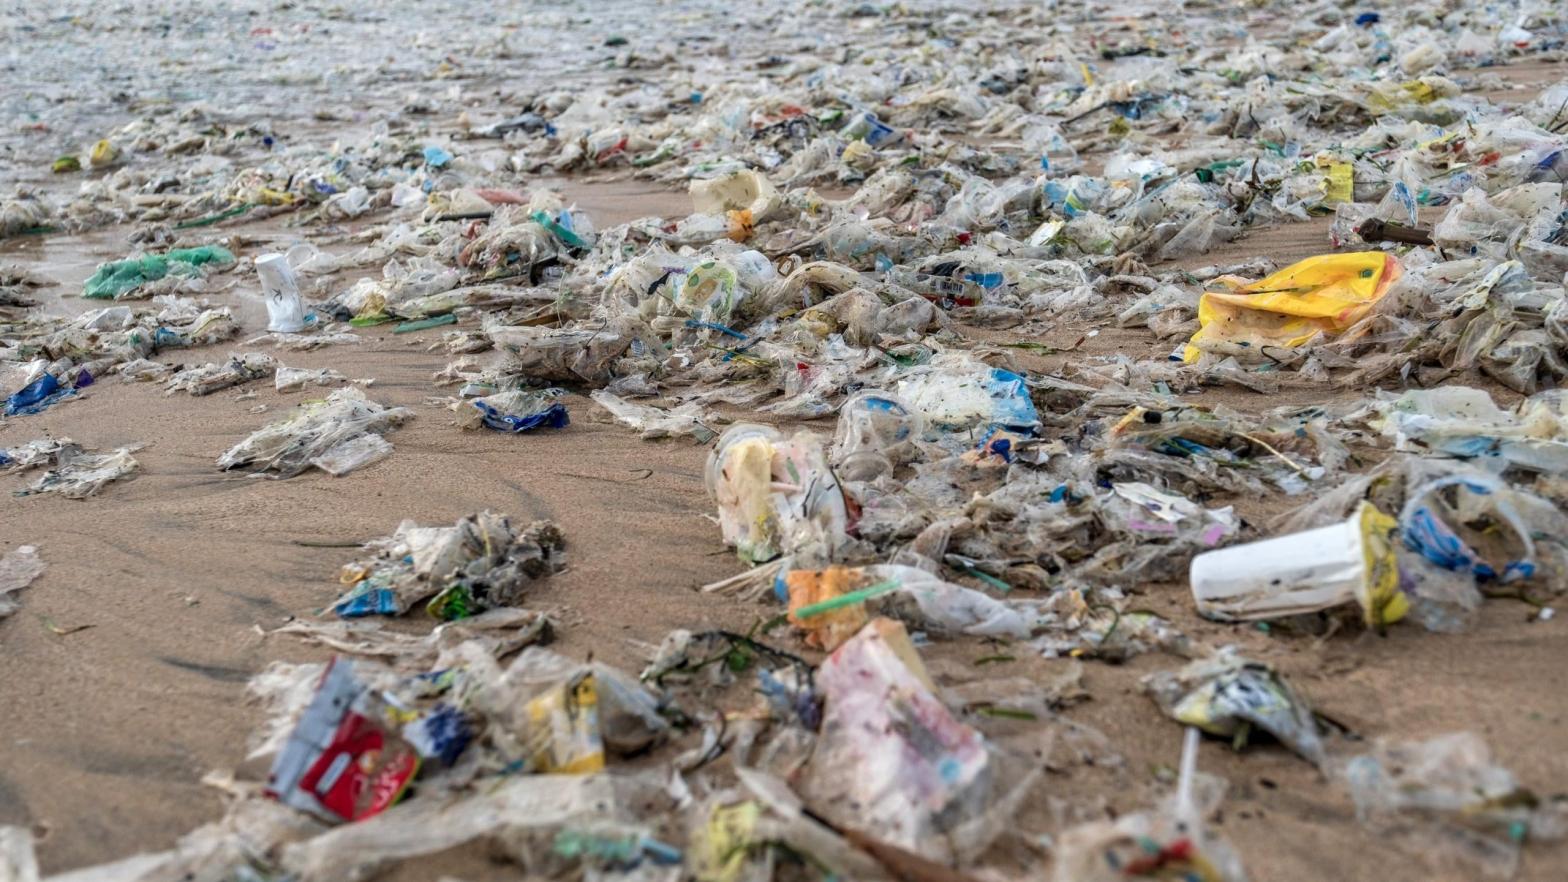 Plastic pollution on a beach in Bali, Indonesia in January 2021. (Photo: Agung Parameswara, Getty Images)